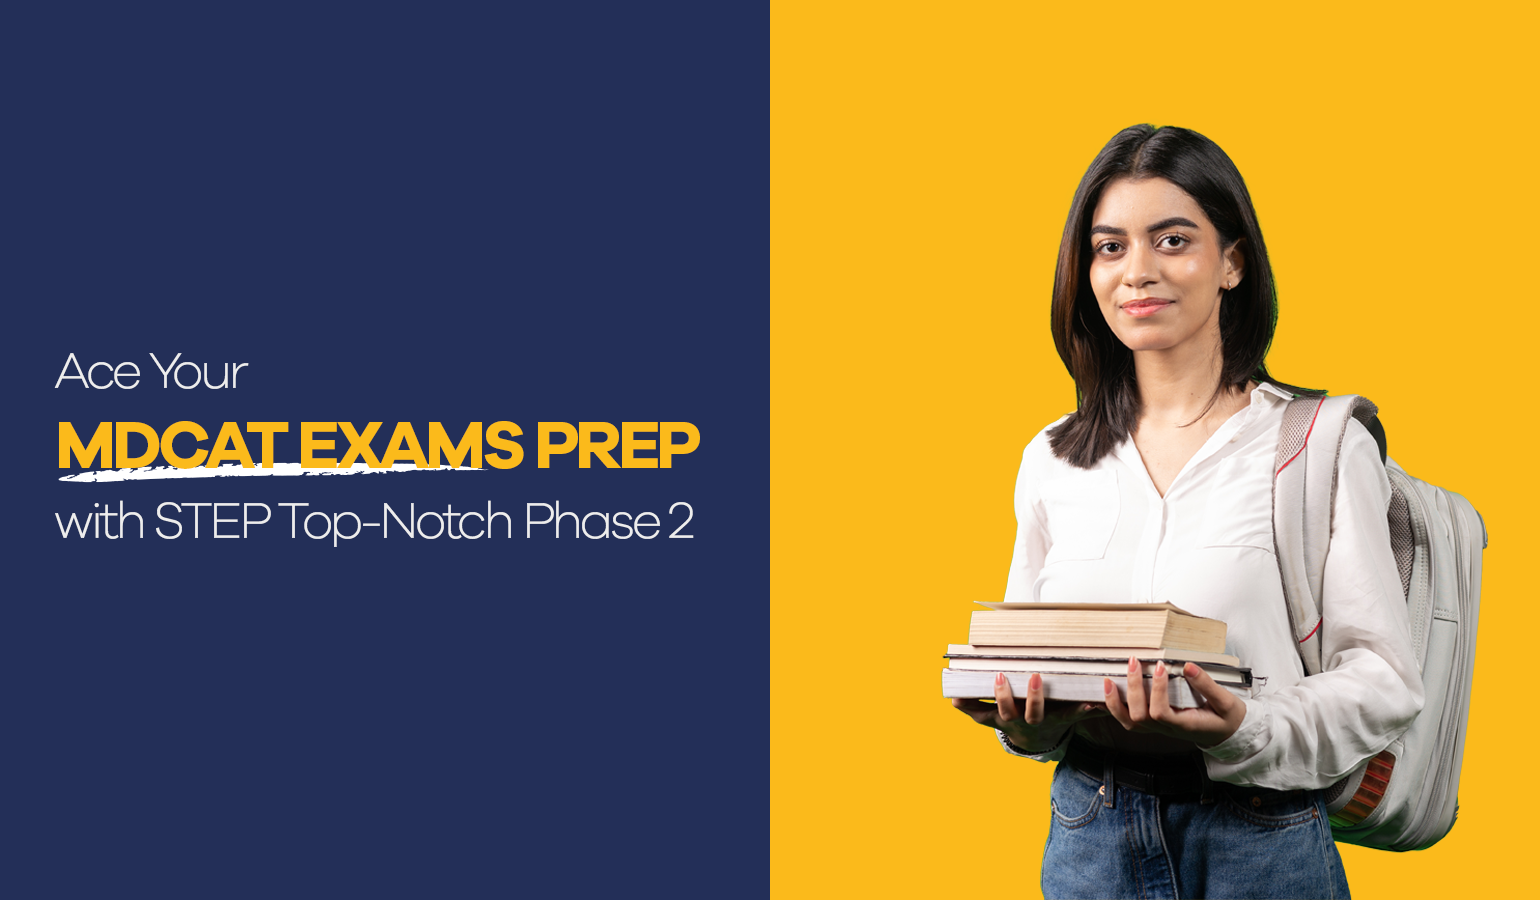 Ace Your MDCAT Exams Prep with STEP Top-Notch Phase 2 